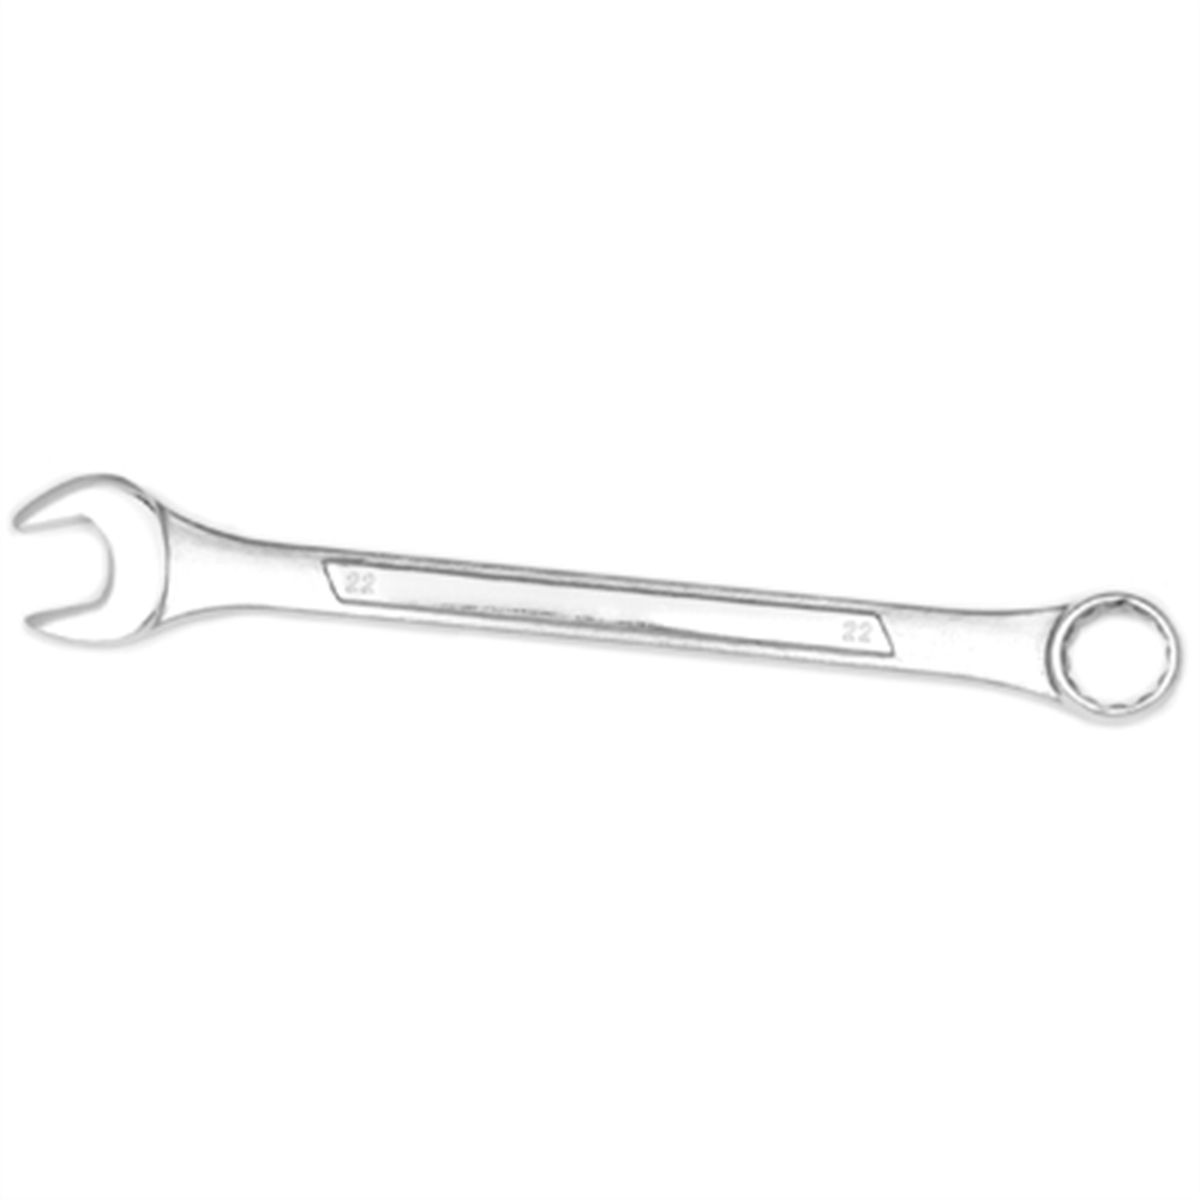 22mm Metric Comb Wrench